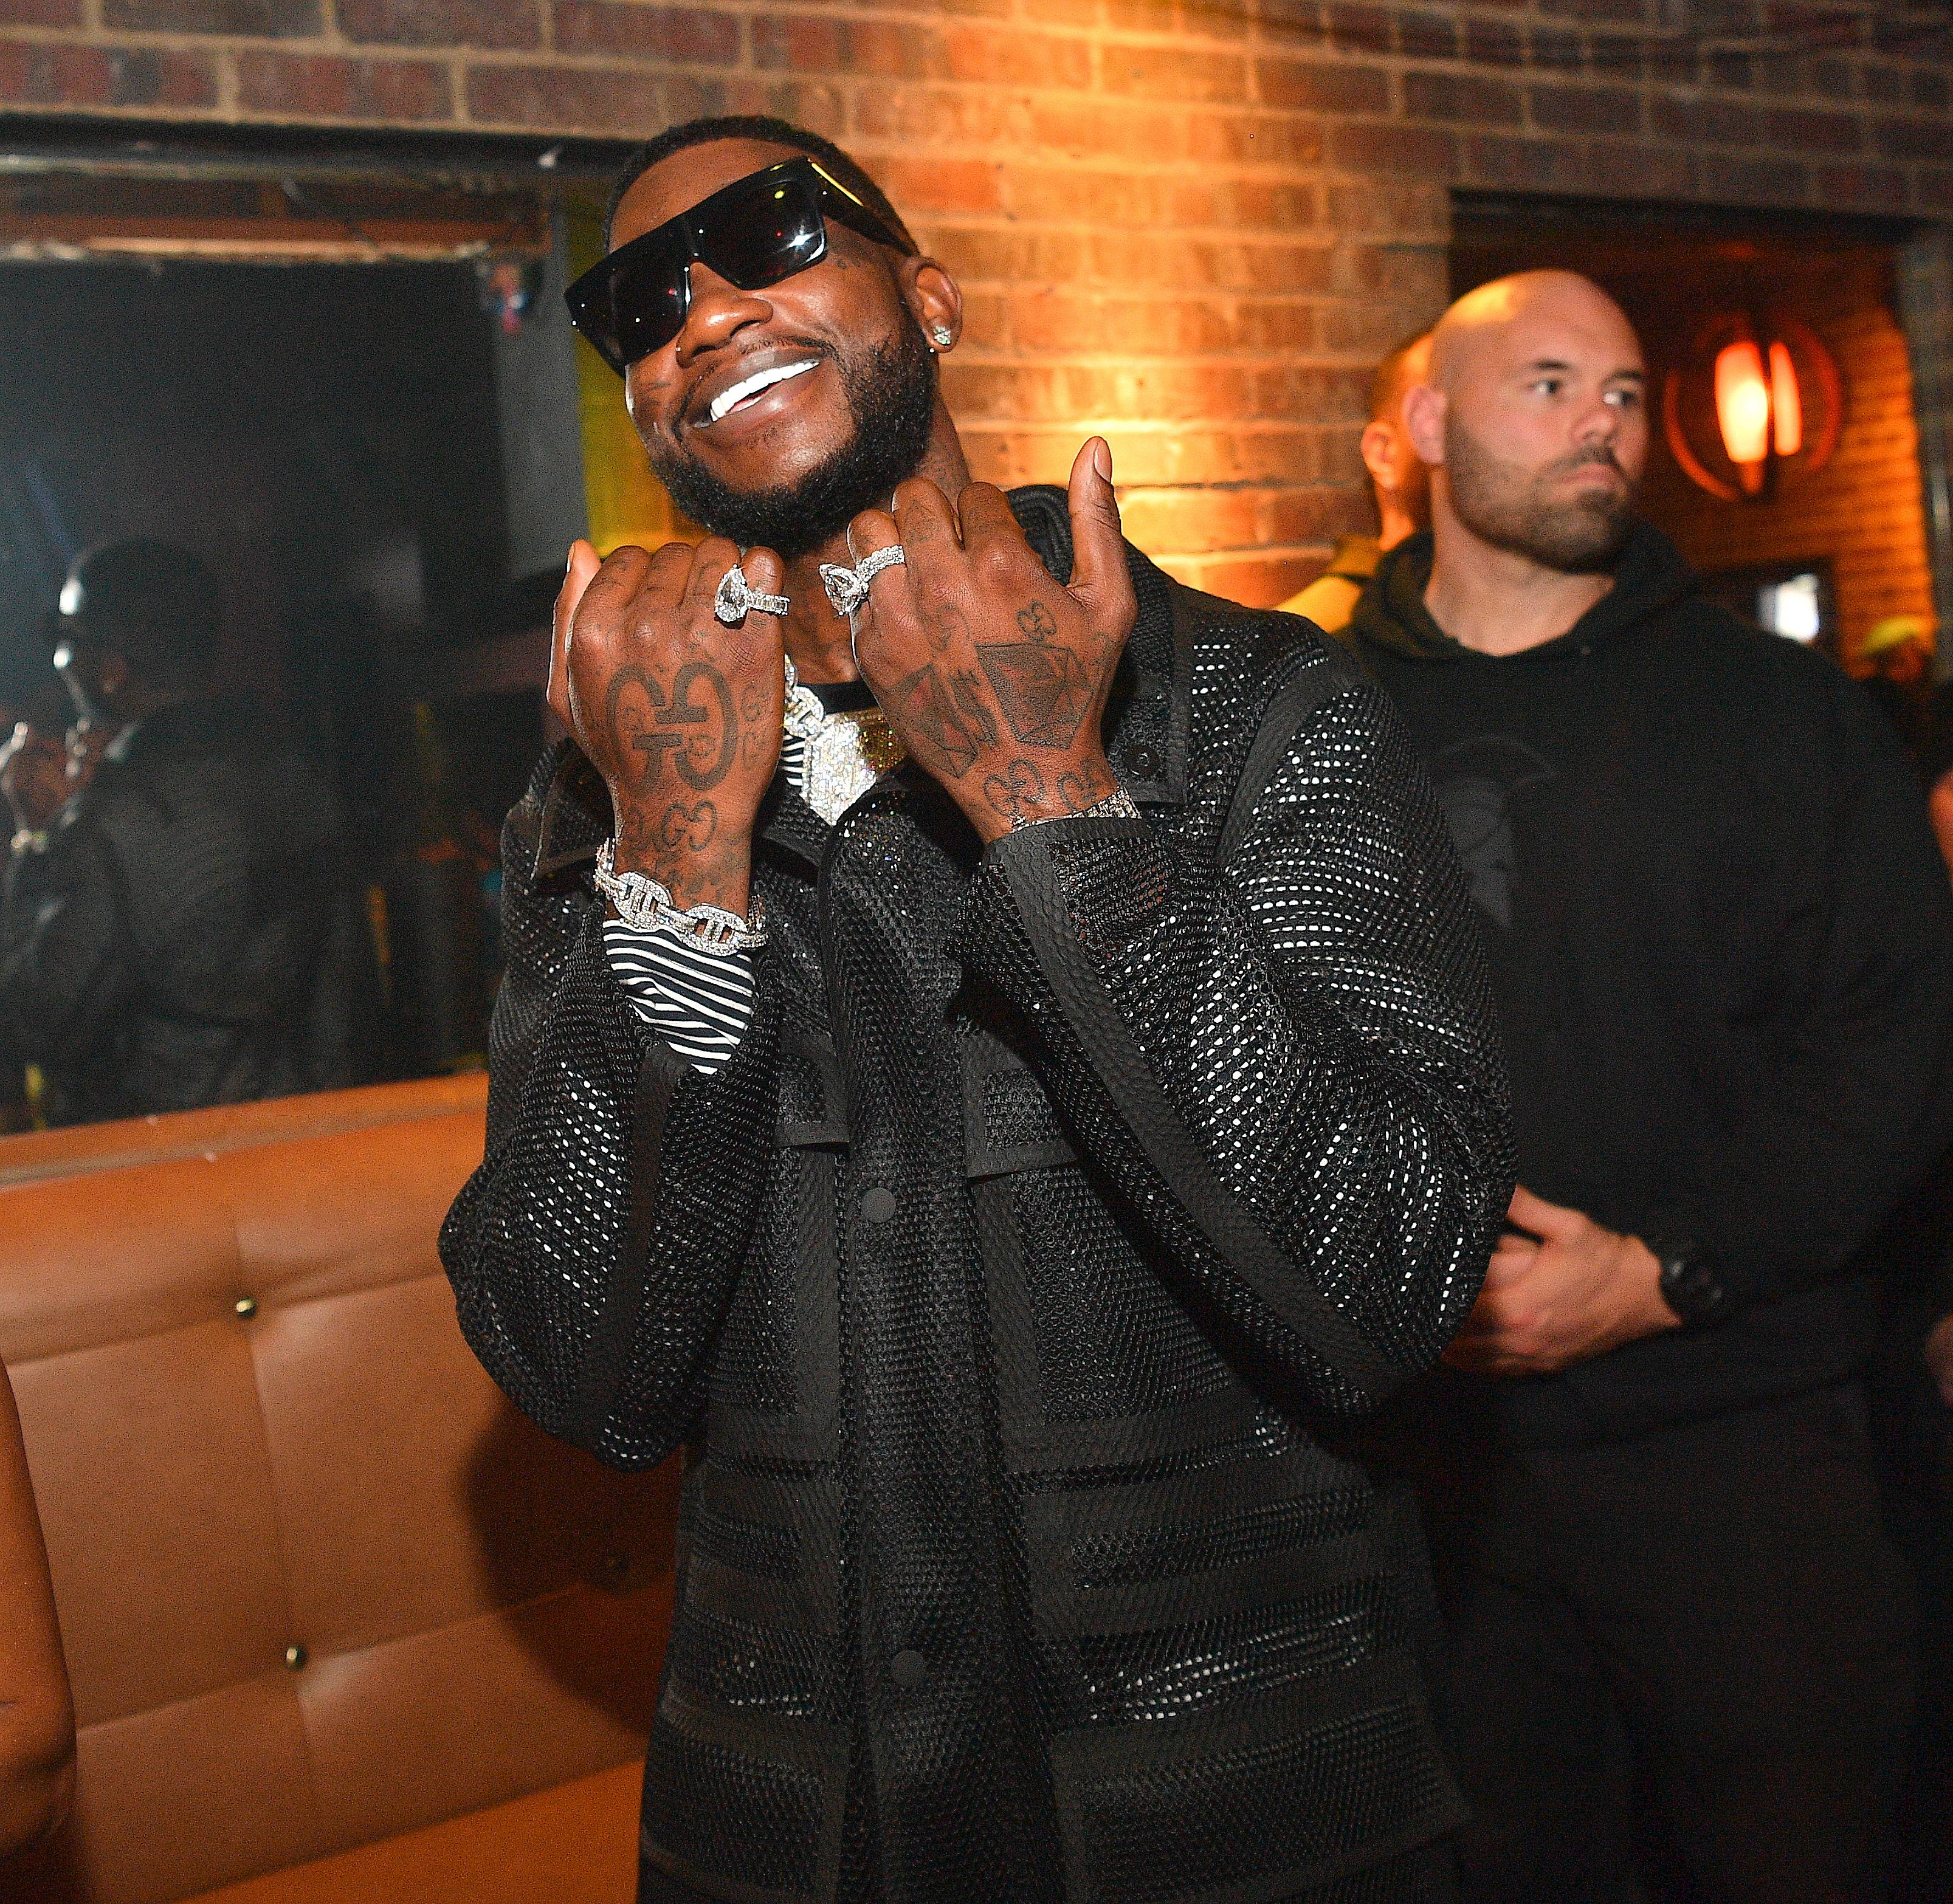 Jeezy and Gucci Mane to Face Off in Verzuz Battle After Feud